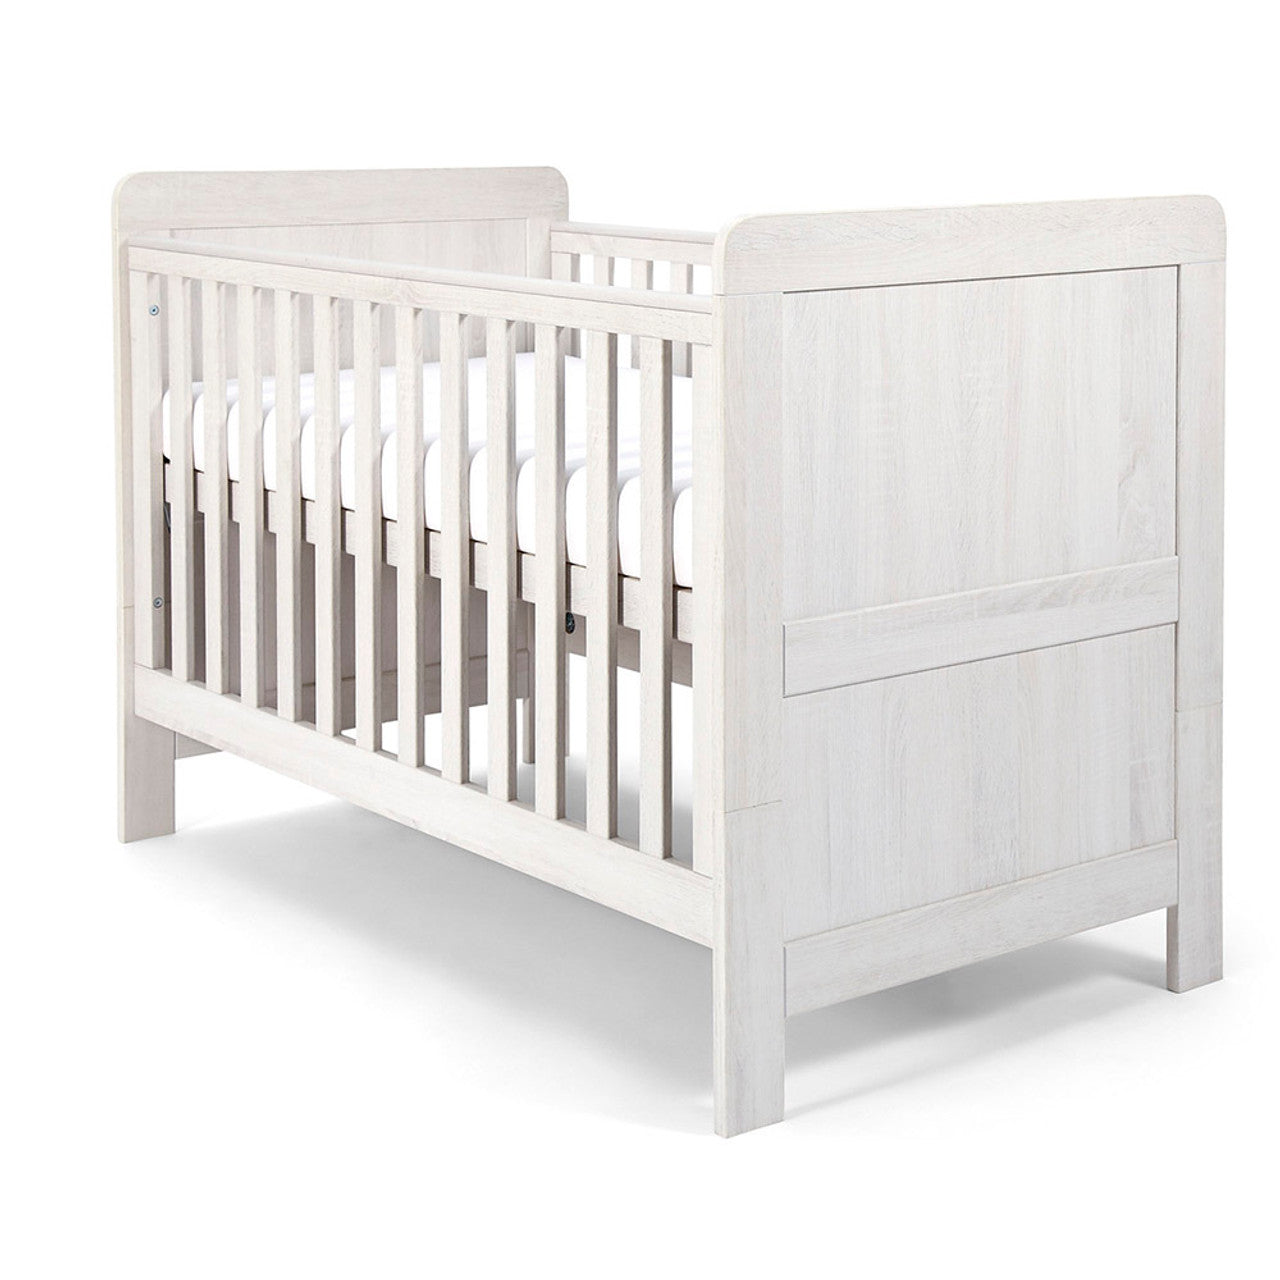 Mamas & Papas Atlas 3 Piece Cot/Toddler Bed Set - Nimbus White -Instore Collection Only